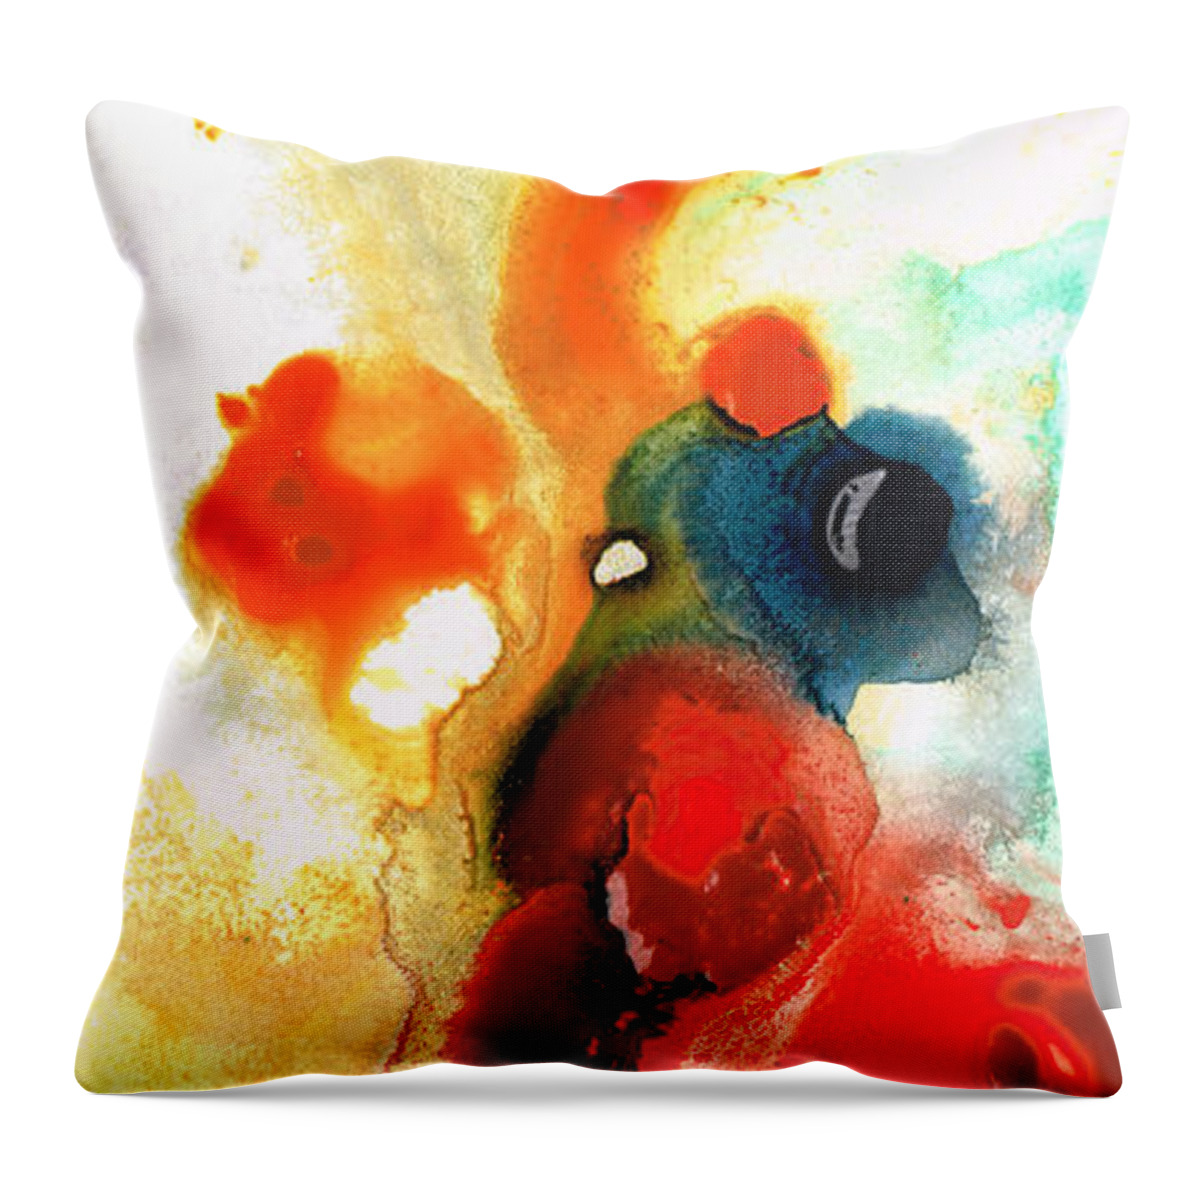 Abstract Art Throw Pillow featuring the painting Mardi Gras - Colorful Abstract Art by Sharon Cummings by Sharon Cummings